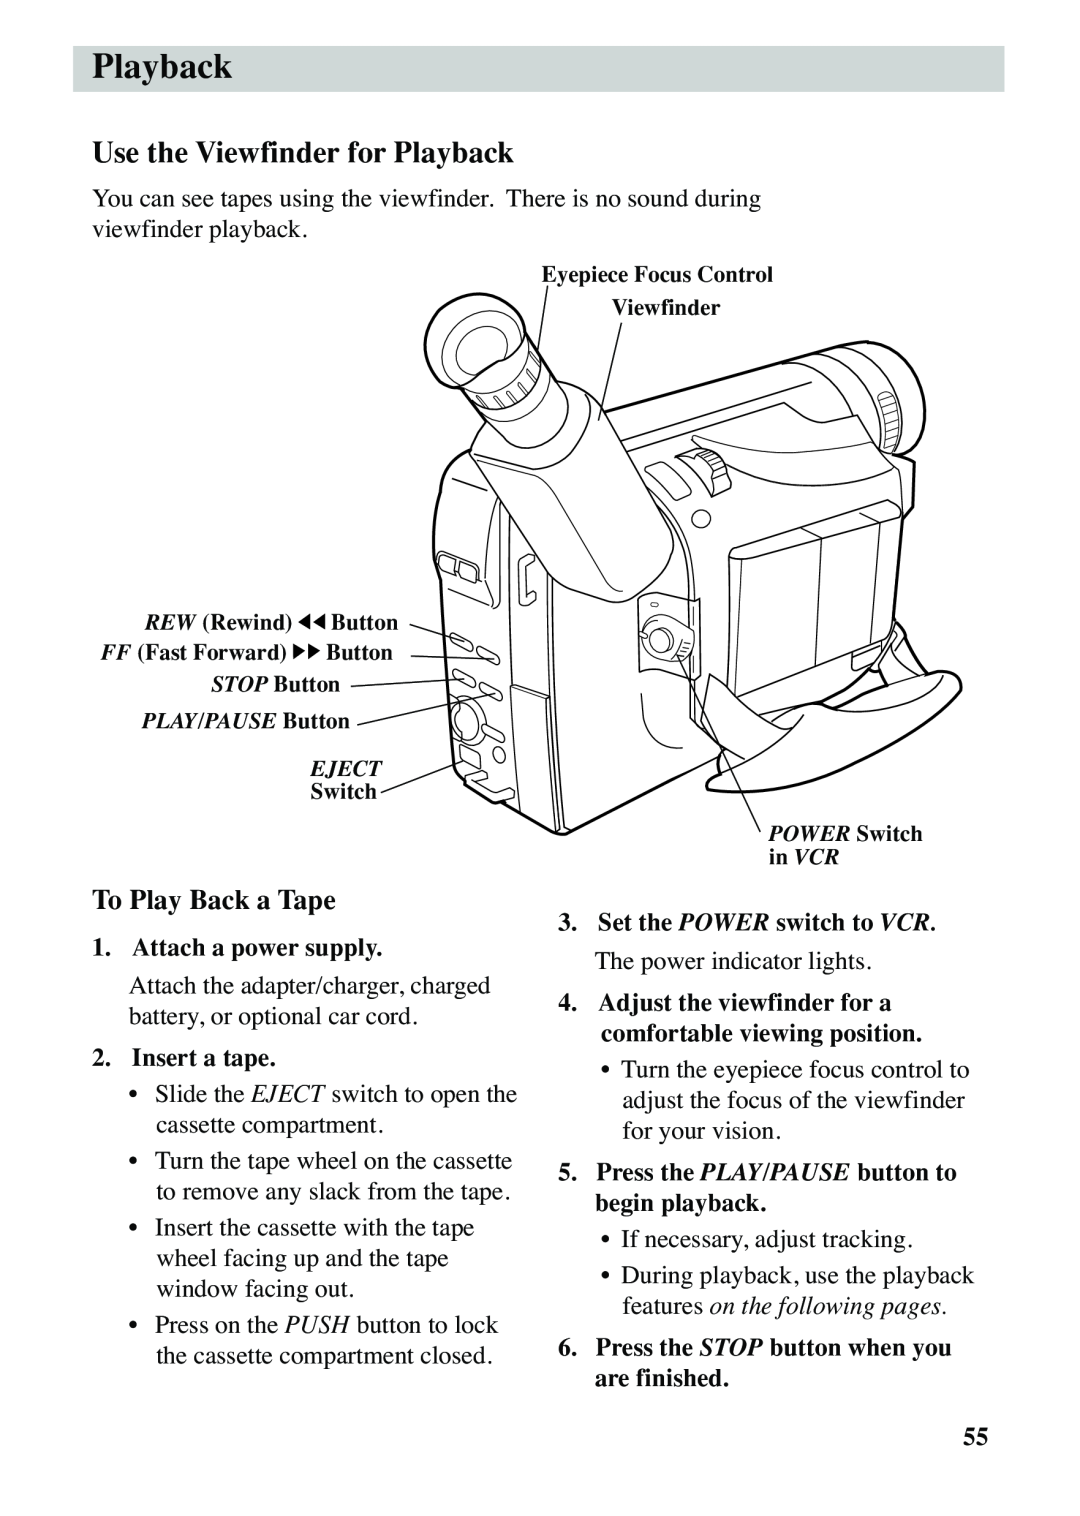 RCA CC6263 manual Use the Viewfinder for Playback, To Play Back a Tape, Attach a power supply, Insert a tape 